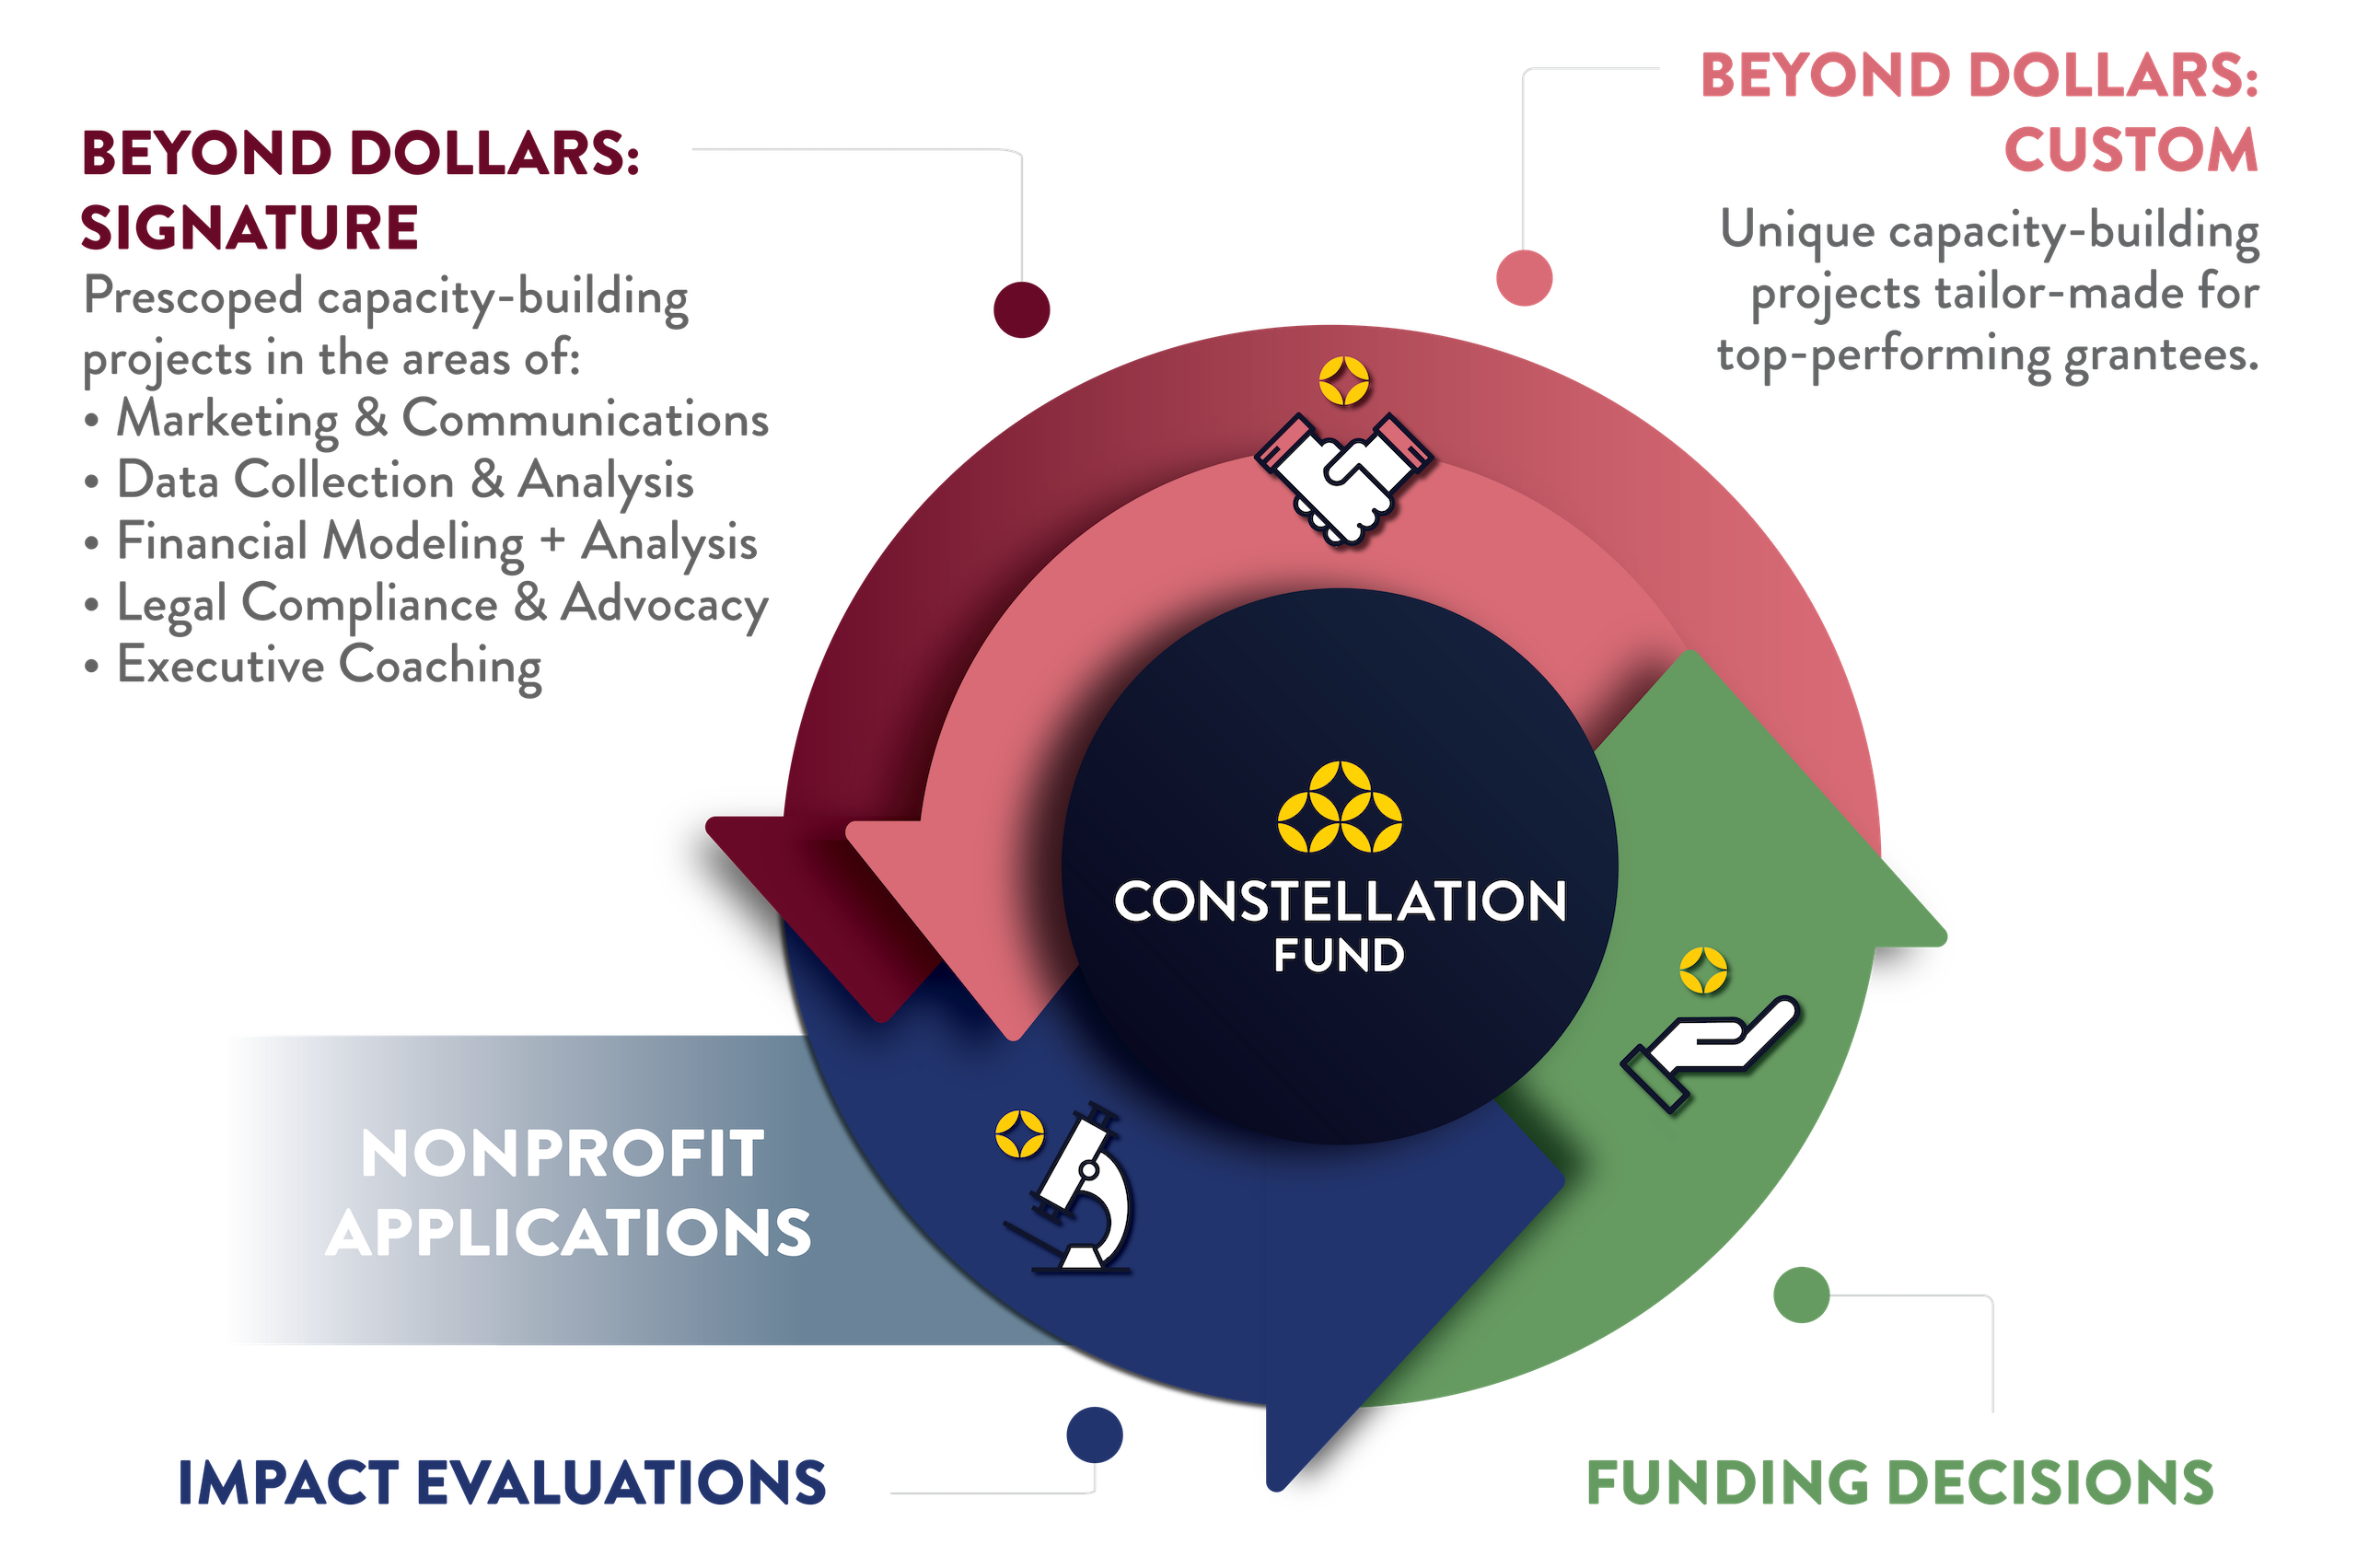 Graphic of Beyond Dollars program as part of Constellation's cycle of work.